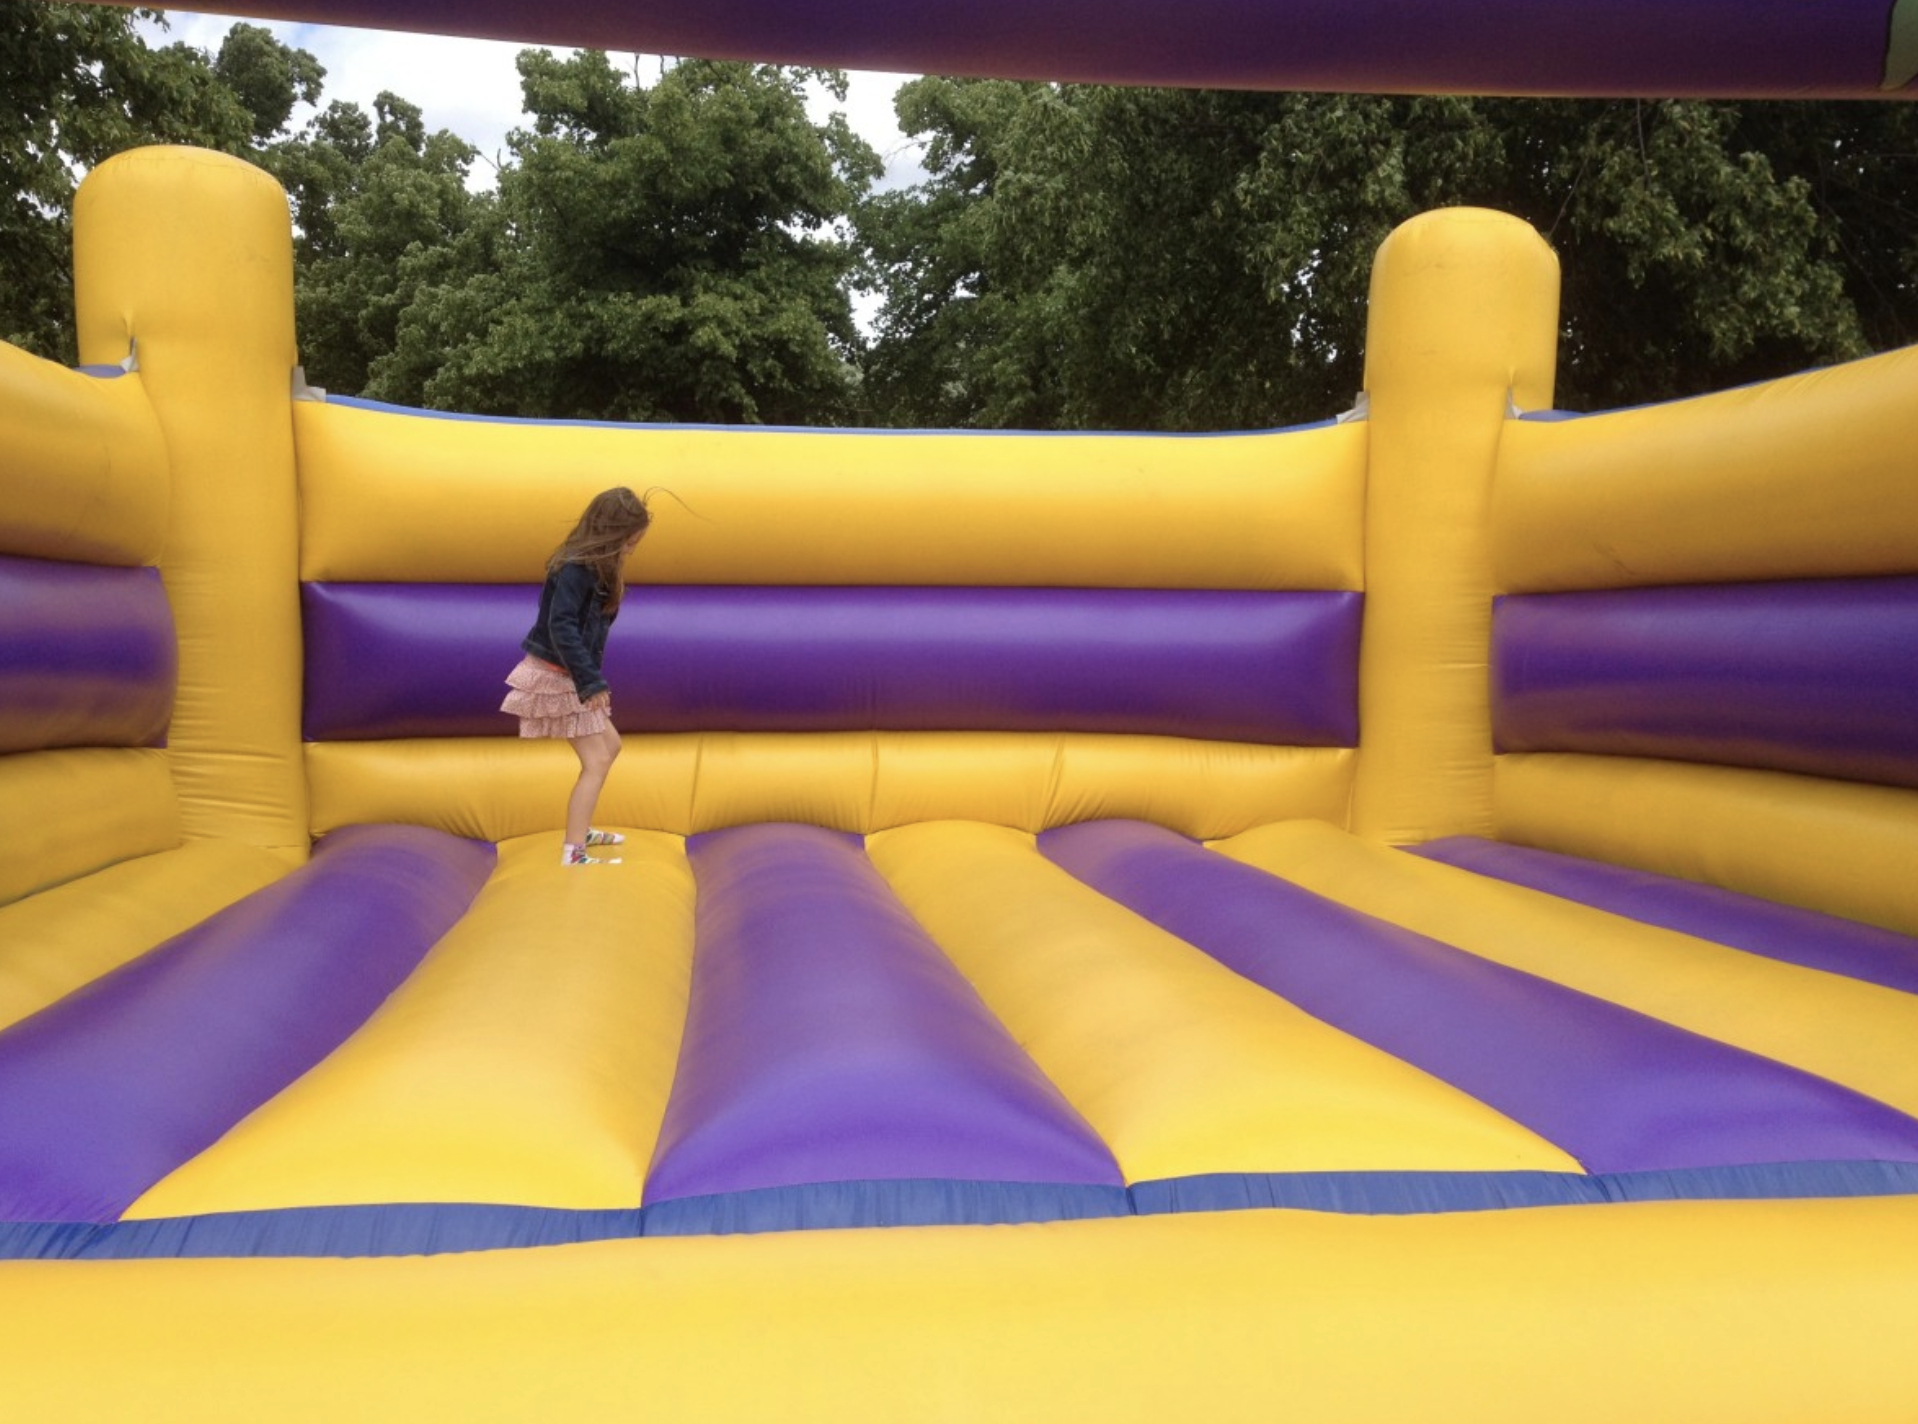 this image shows bounce house rentals in Folsom, CA